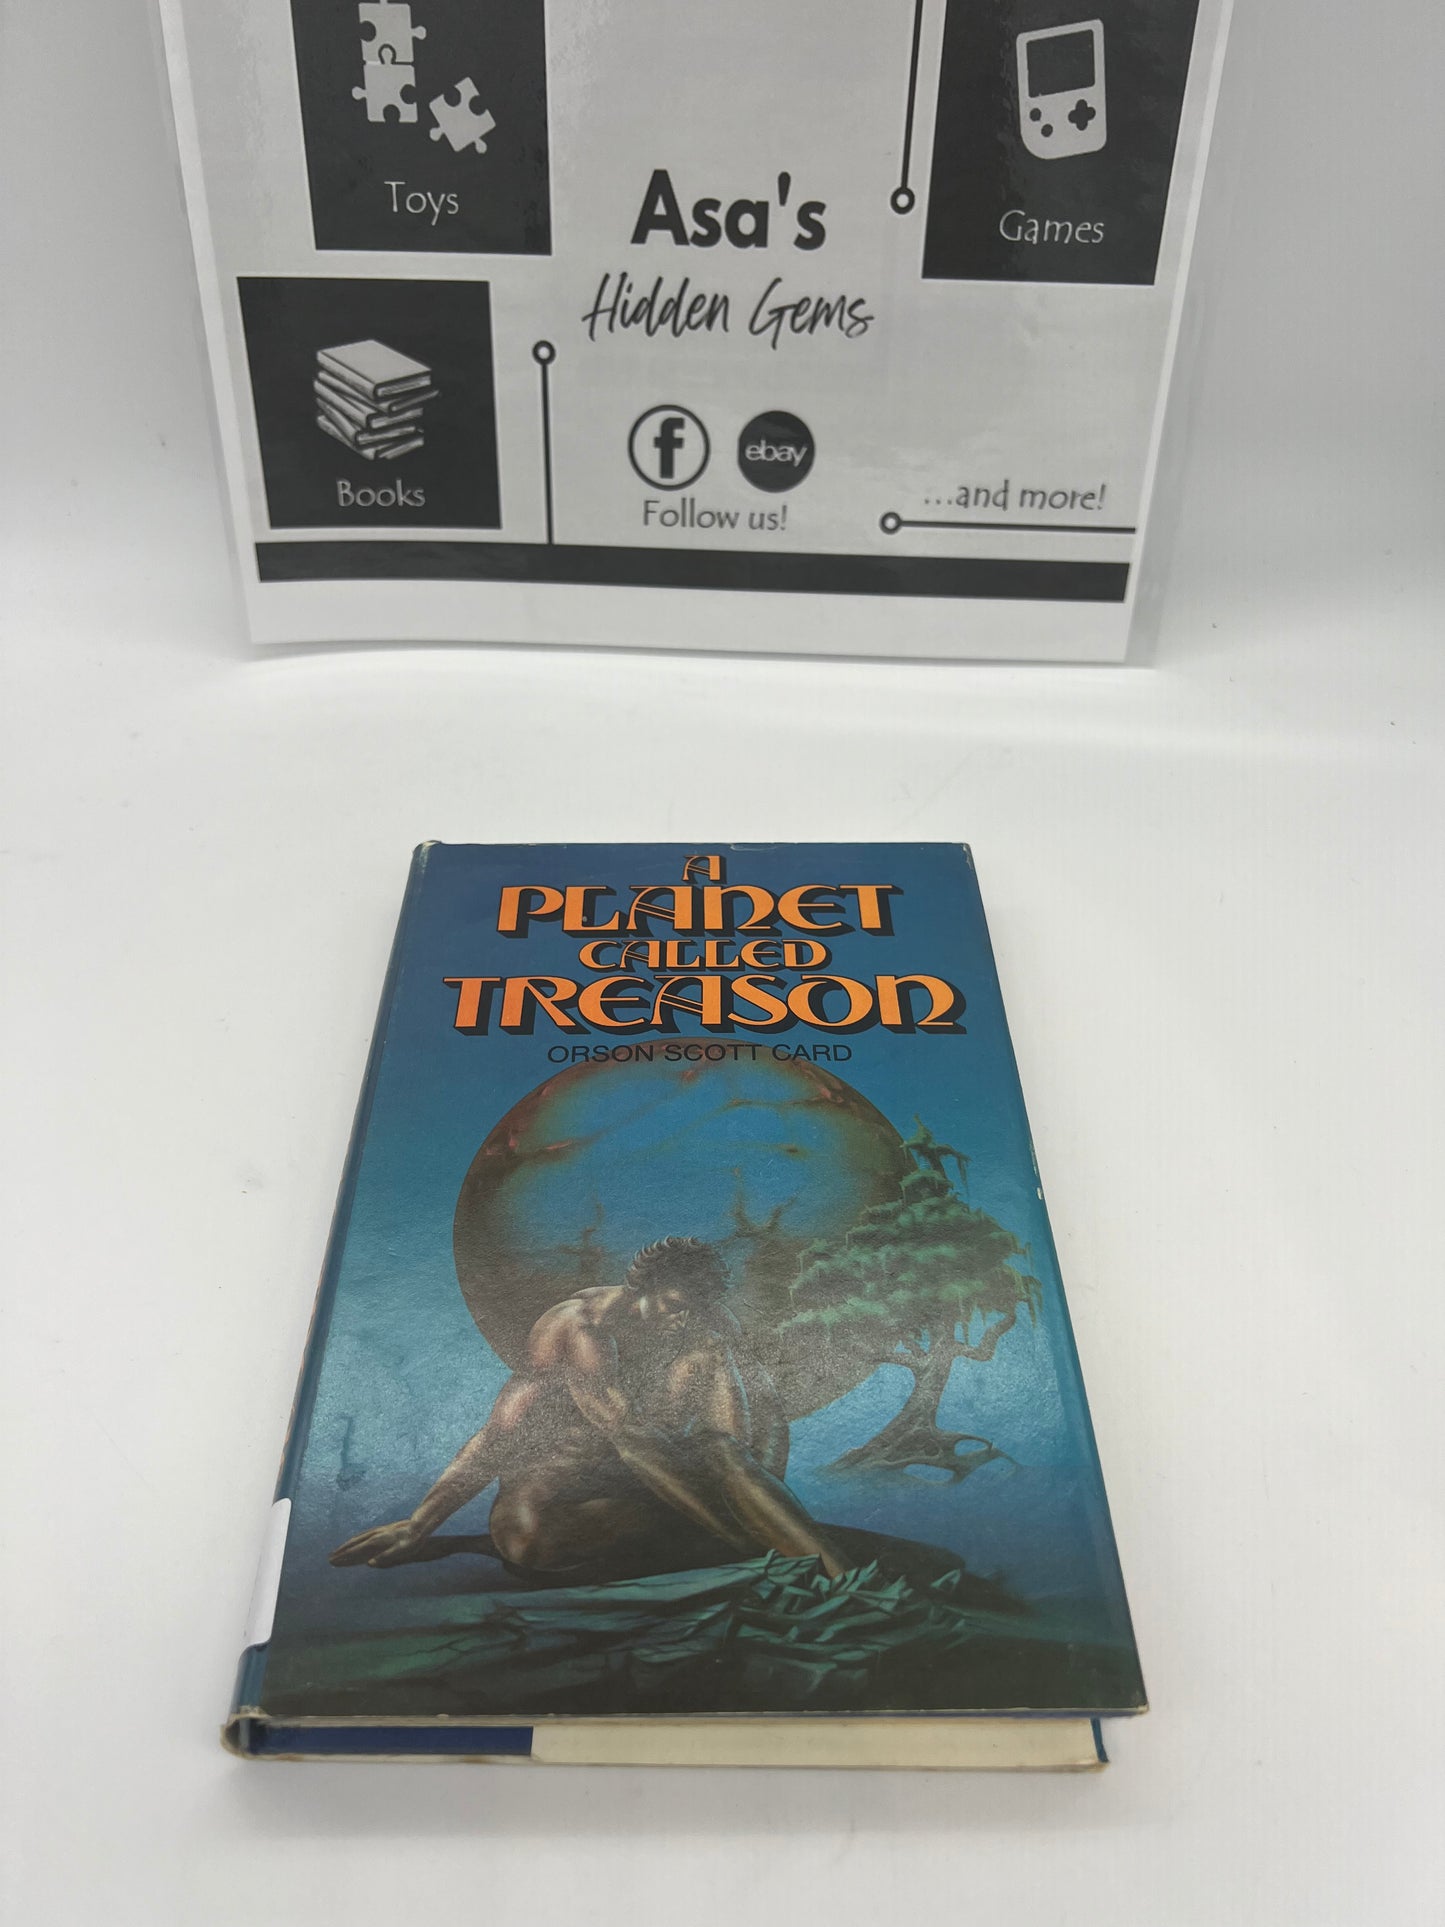 A Planet Called Treason by Orson Scott Card Hardcover